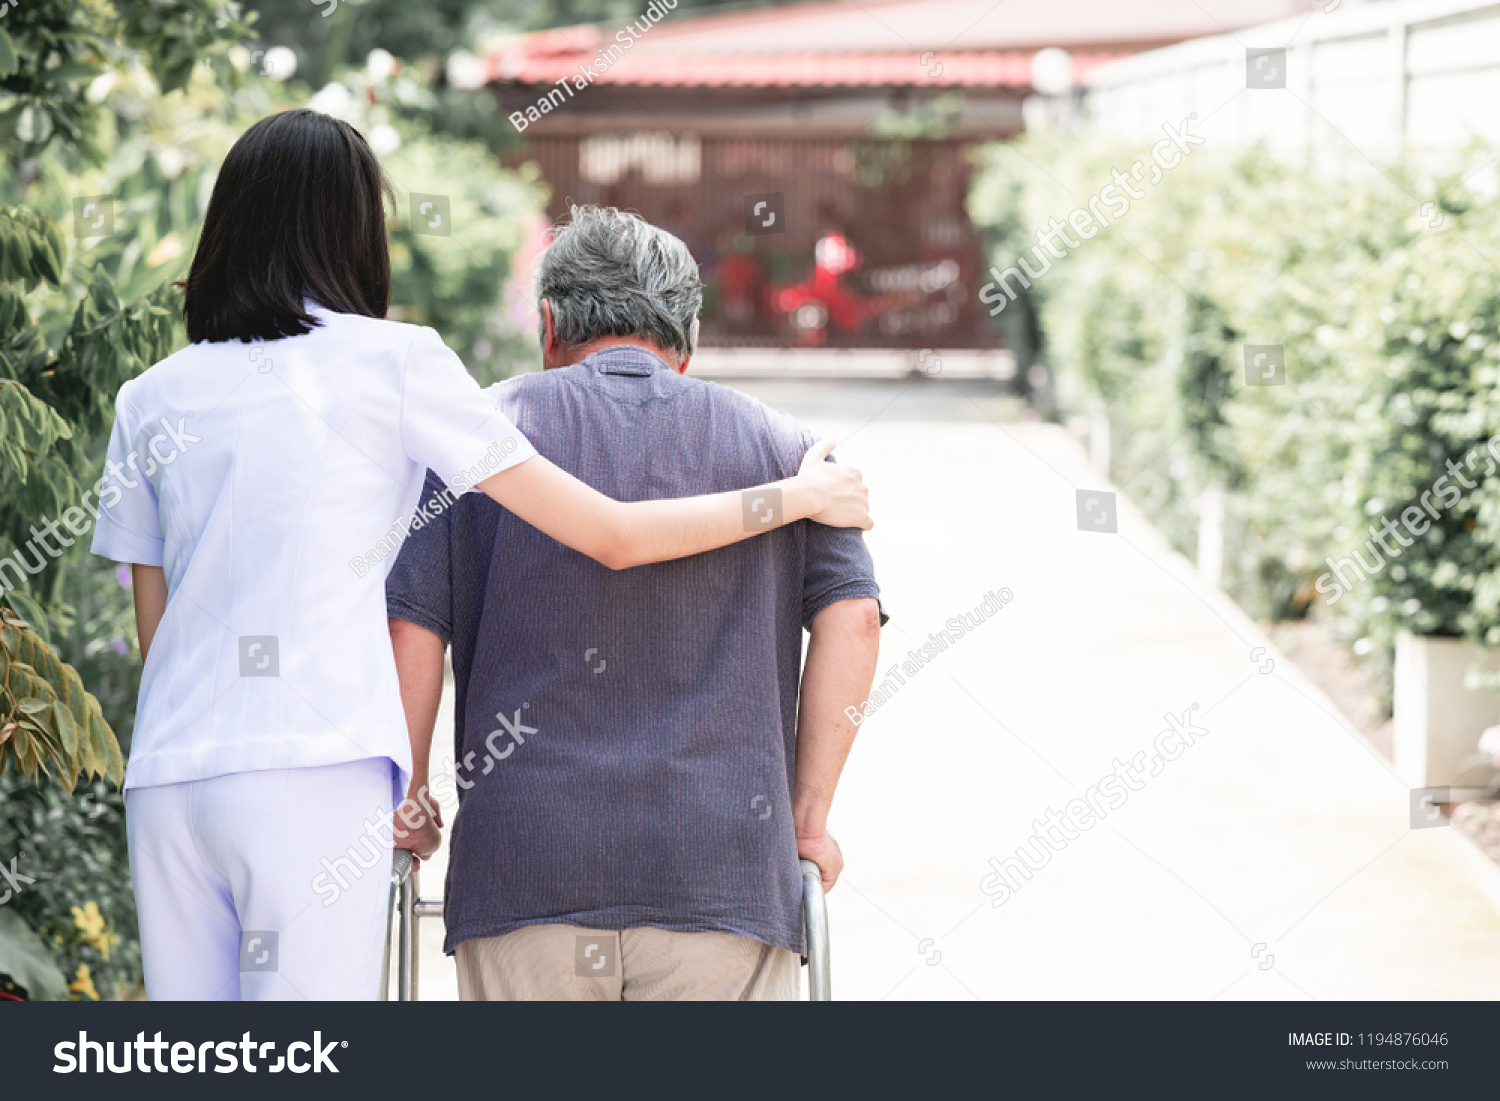 Nurse with patient using walker in retirement home. Young female nurse holding old man's shoulder in outdoor garden walking. Senior care, care taker and senior retirement home service concept. #1194876046